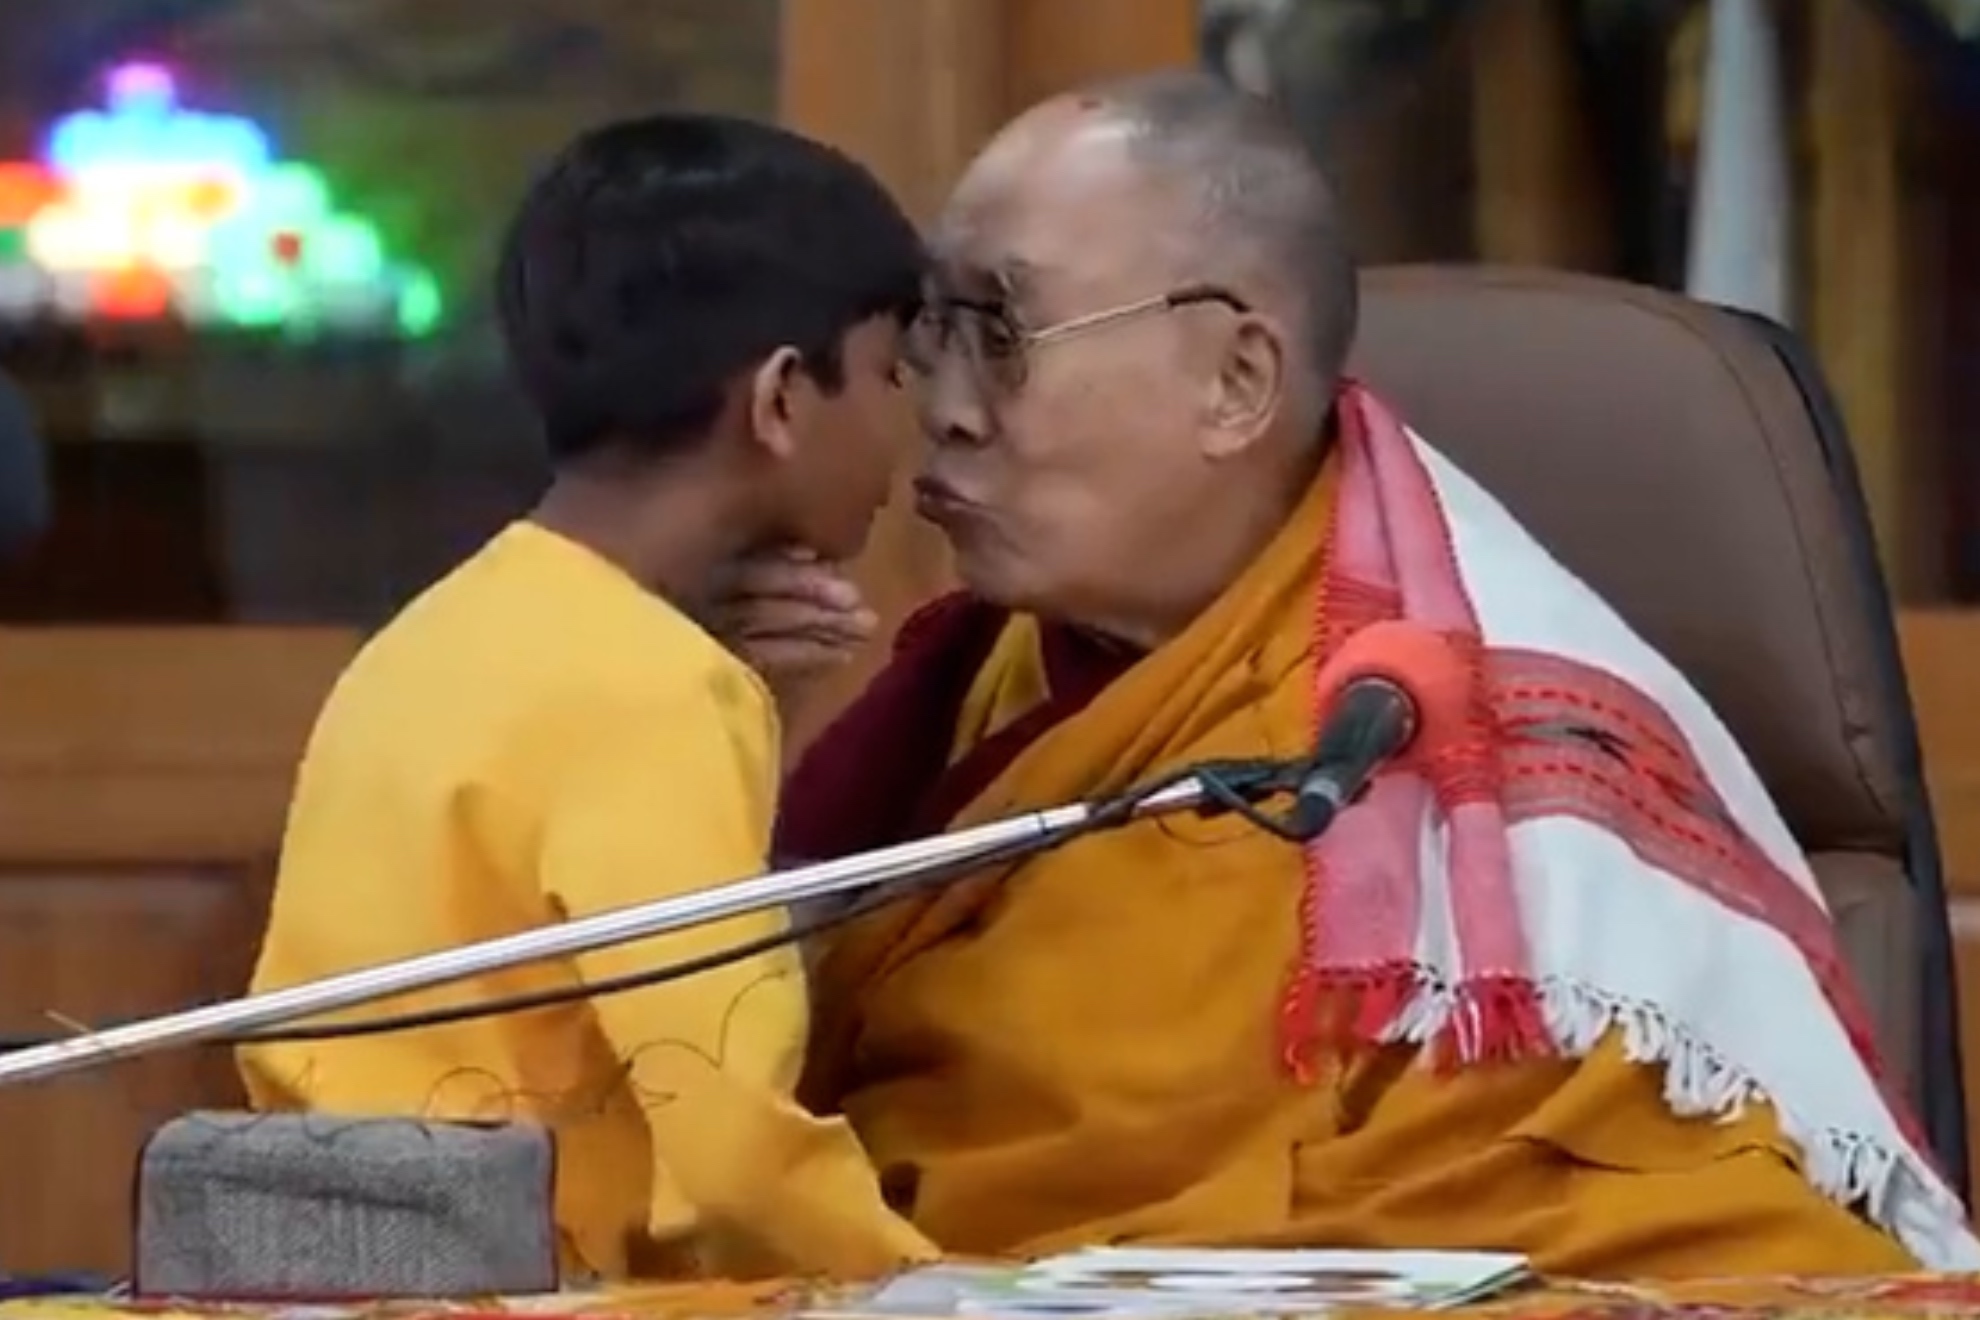 The boy who was kissed on the mouth by the Dalai Lama speaks out for the first time | Marca